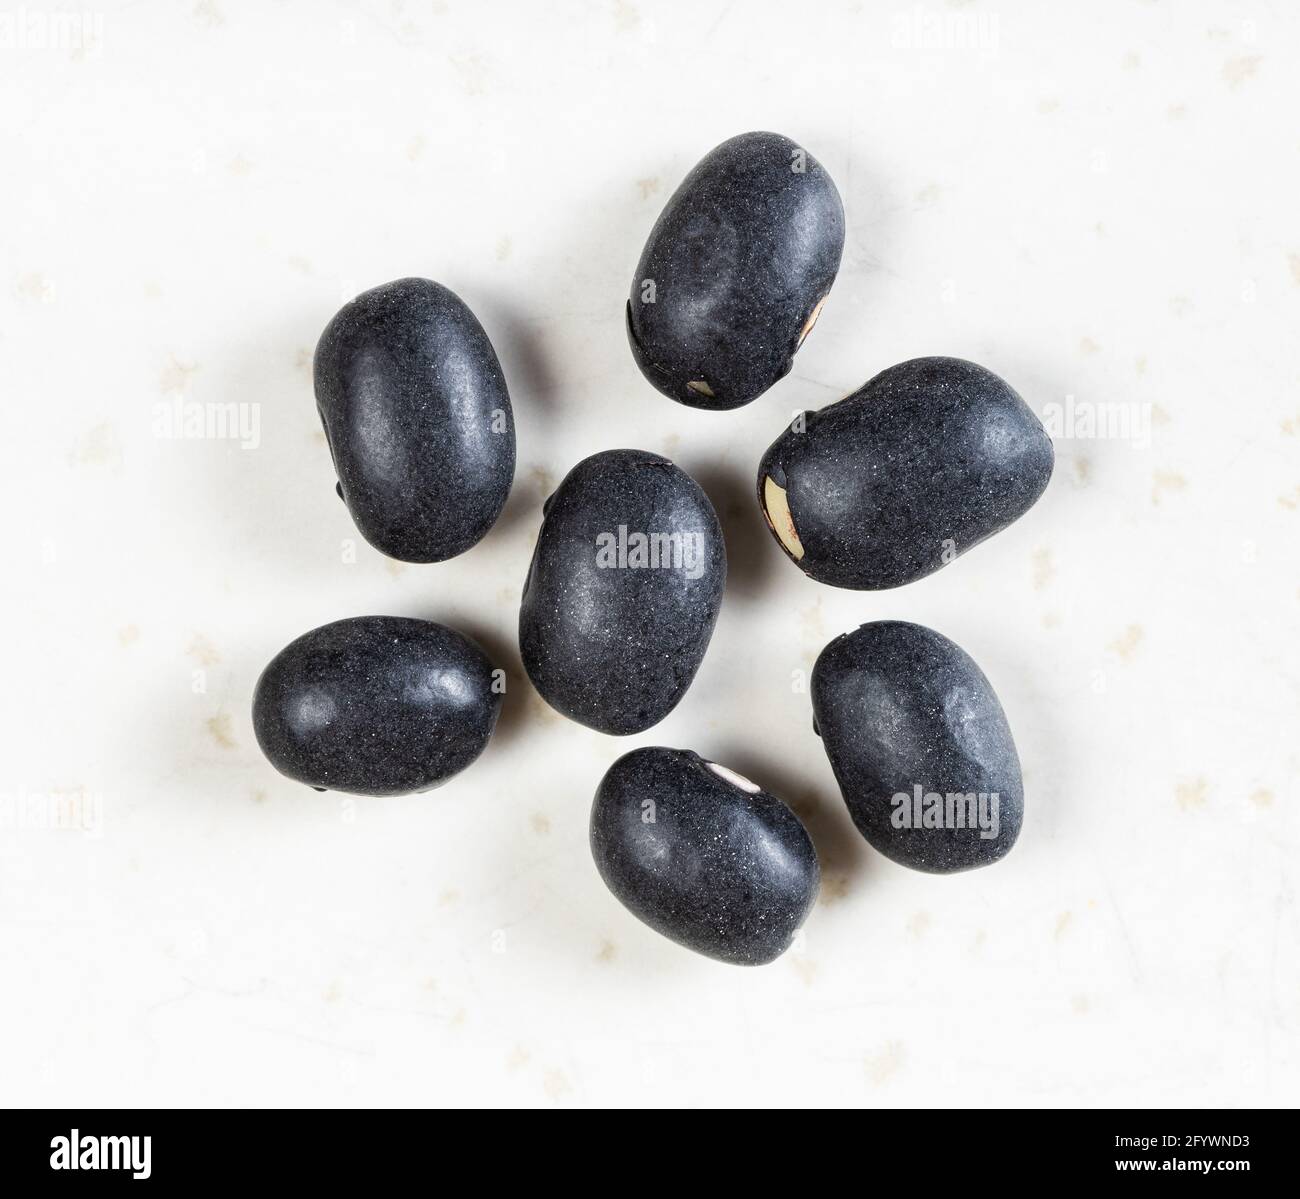 several raw mexico black beans close up on gray ceramic plate Stock Photo